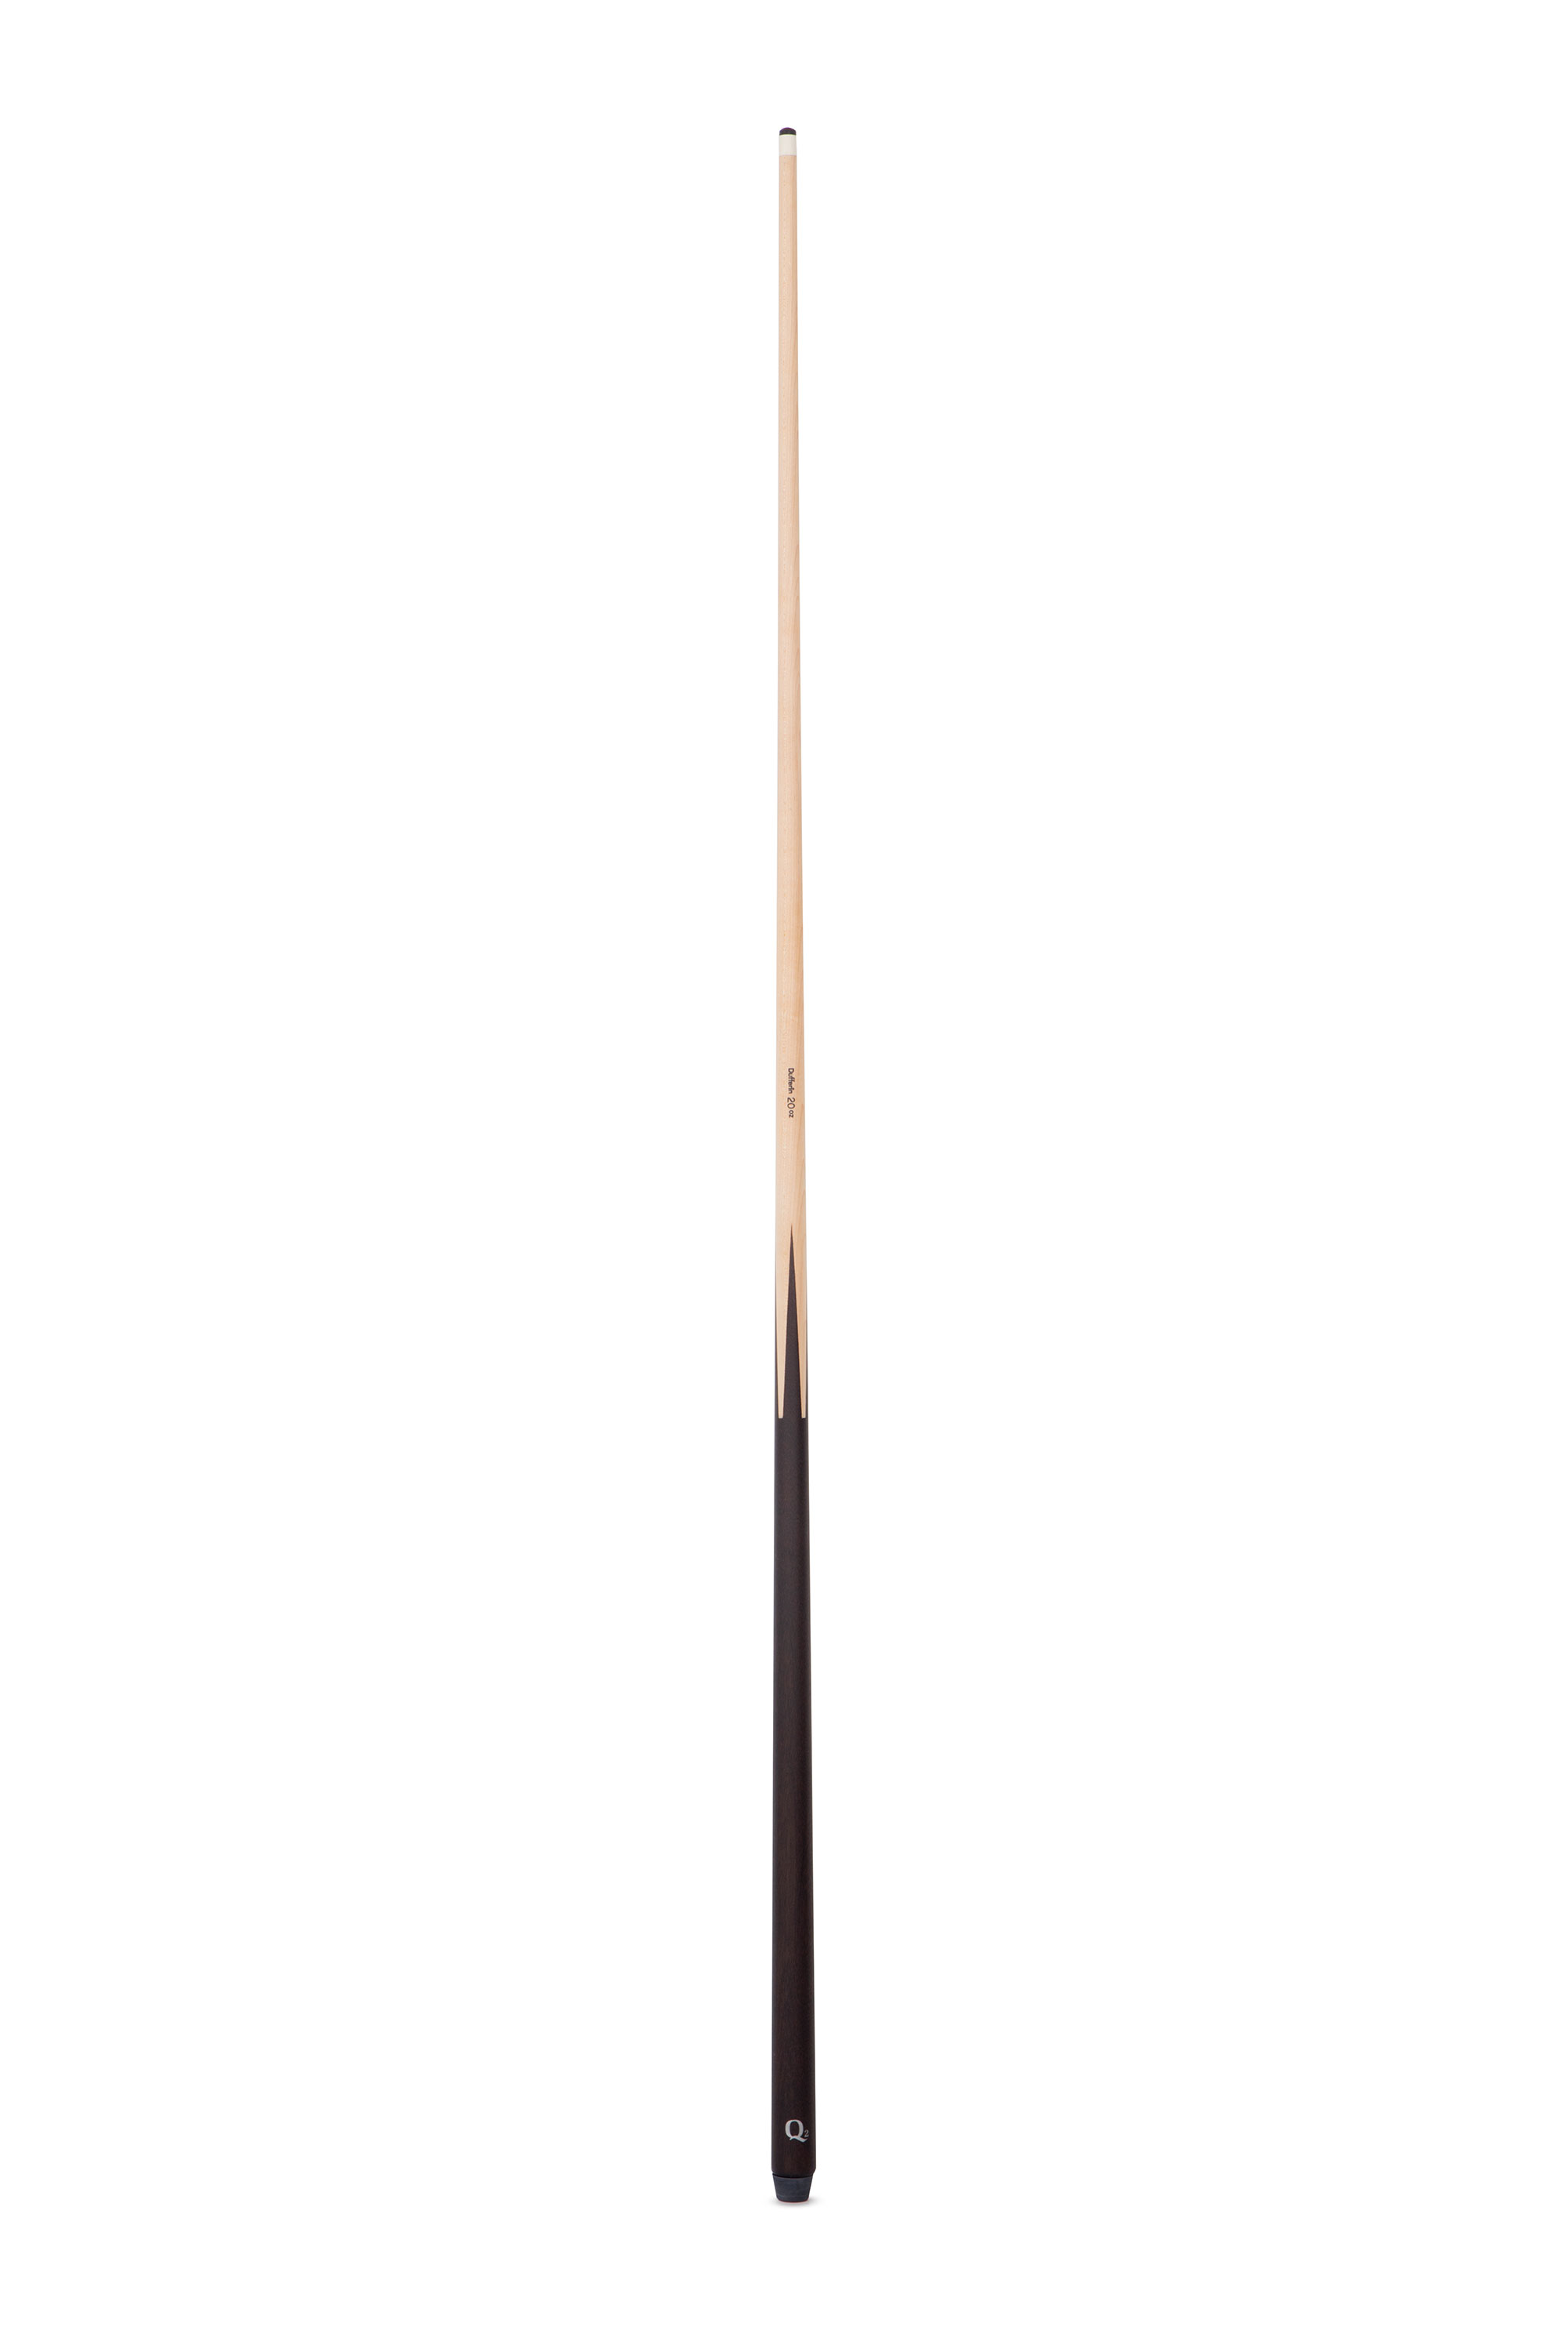 Pool Cue Q2 in Canadian maple "Pool" 1 piece by Dufferin